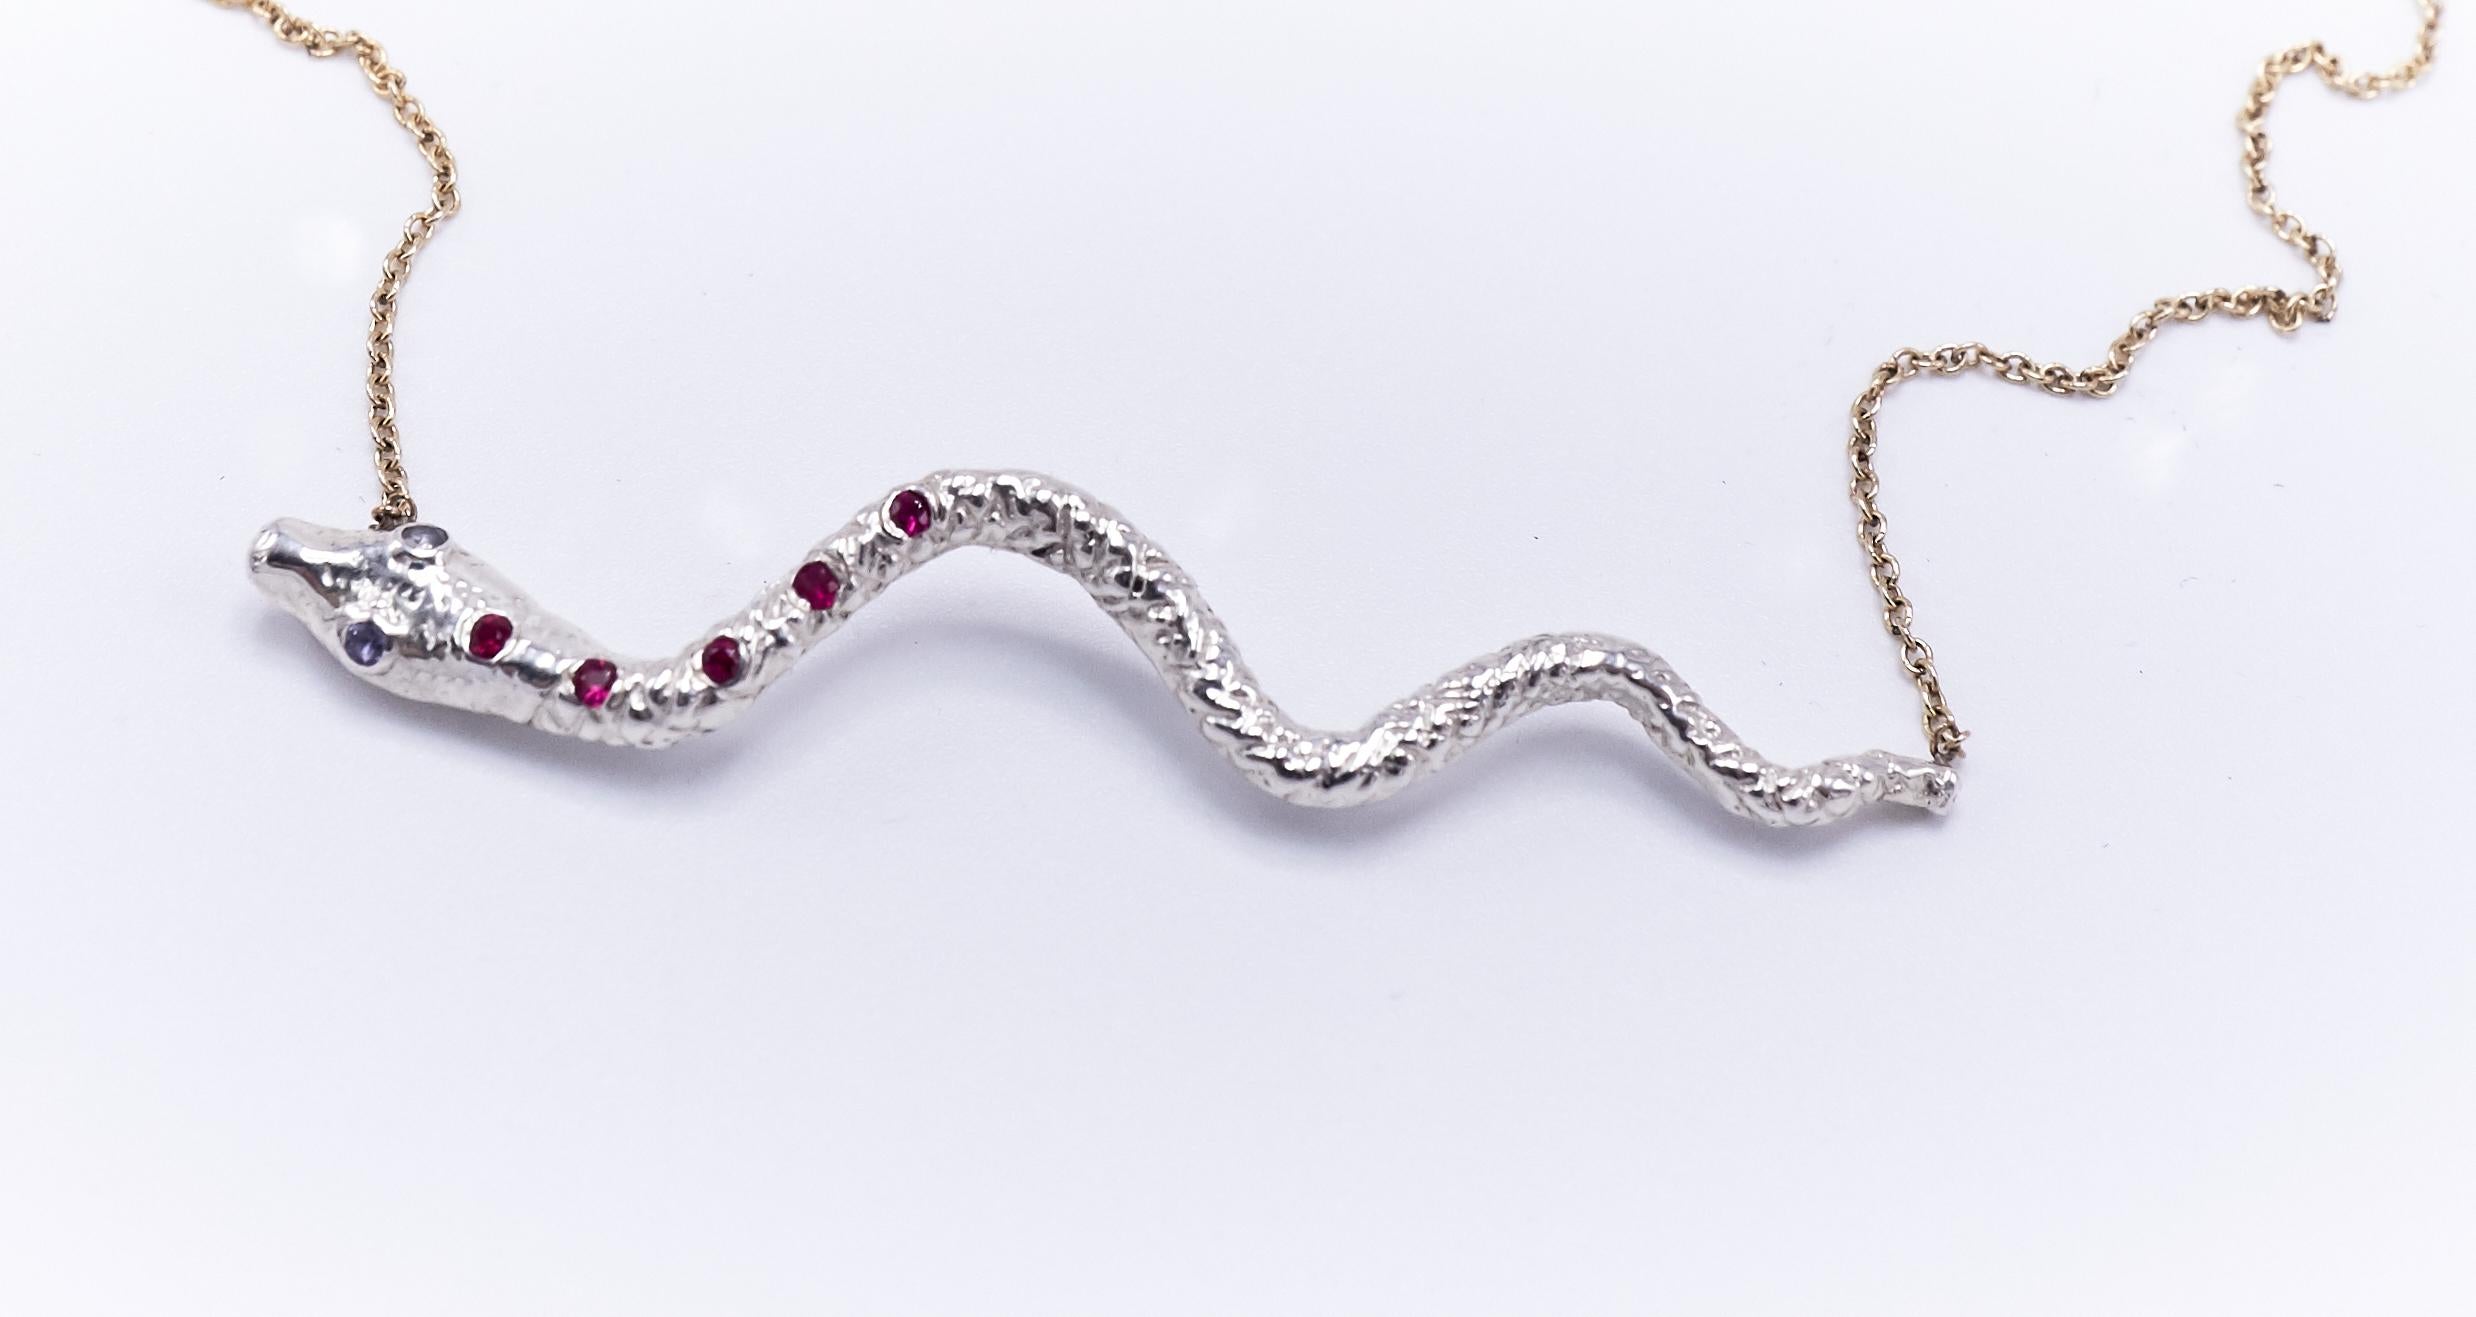 Snake Necklace Silver Ruby Iolite Gold Filled Chain J Dauphin

J DAUPHIN short necklace 